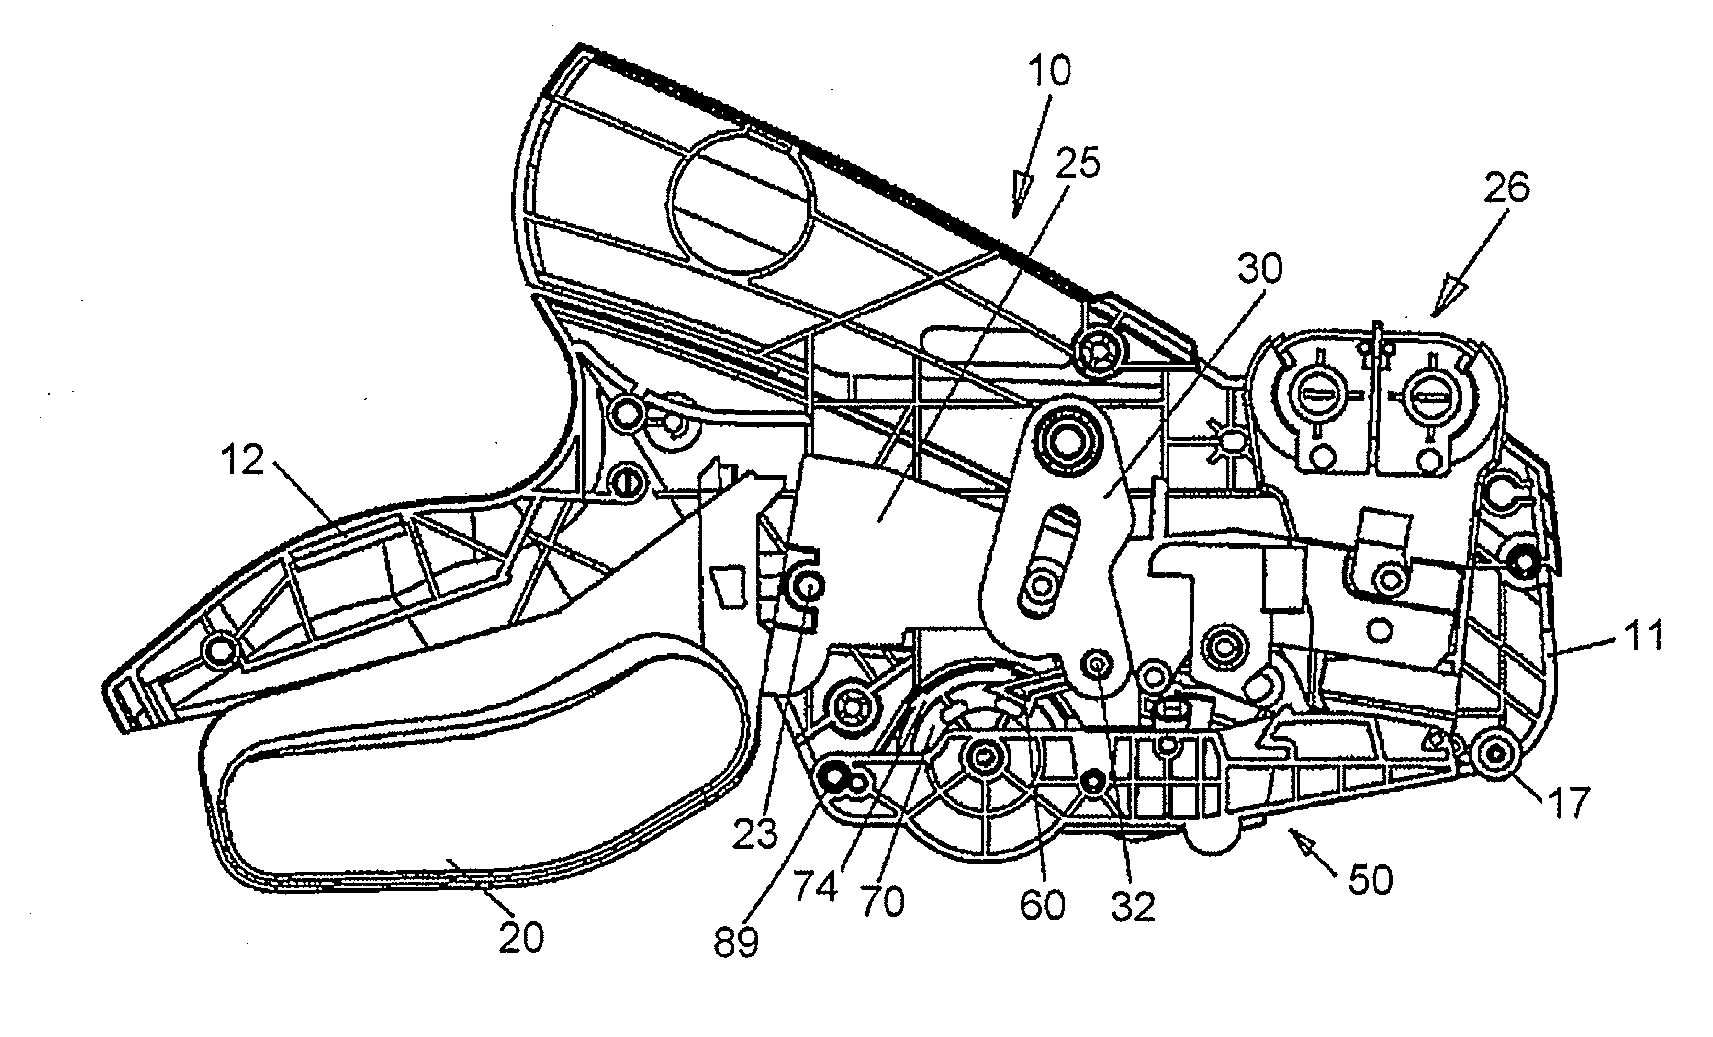 Labeling apparatus having a pivotable base plate with feed wheel